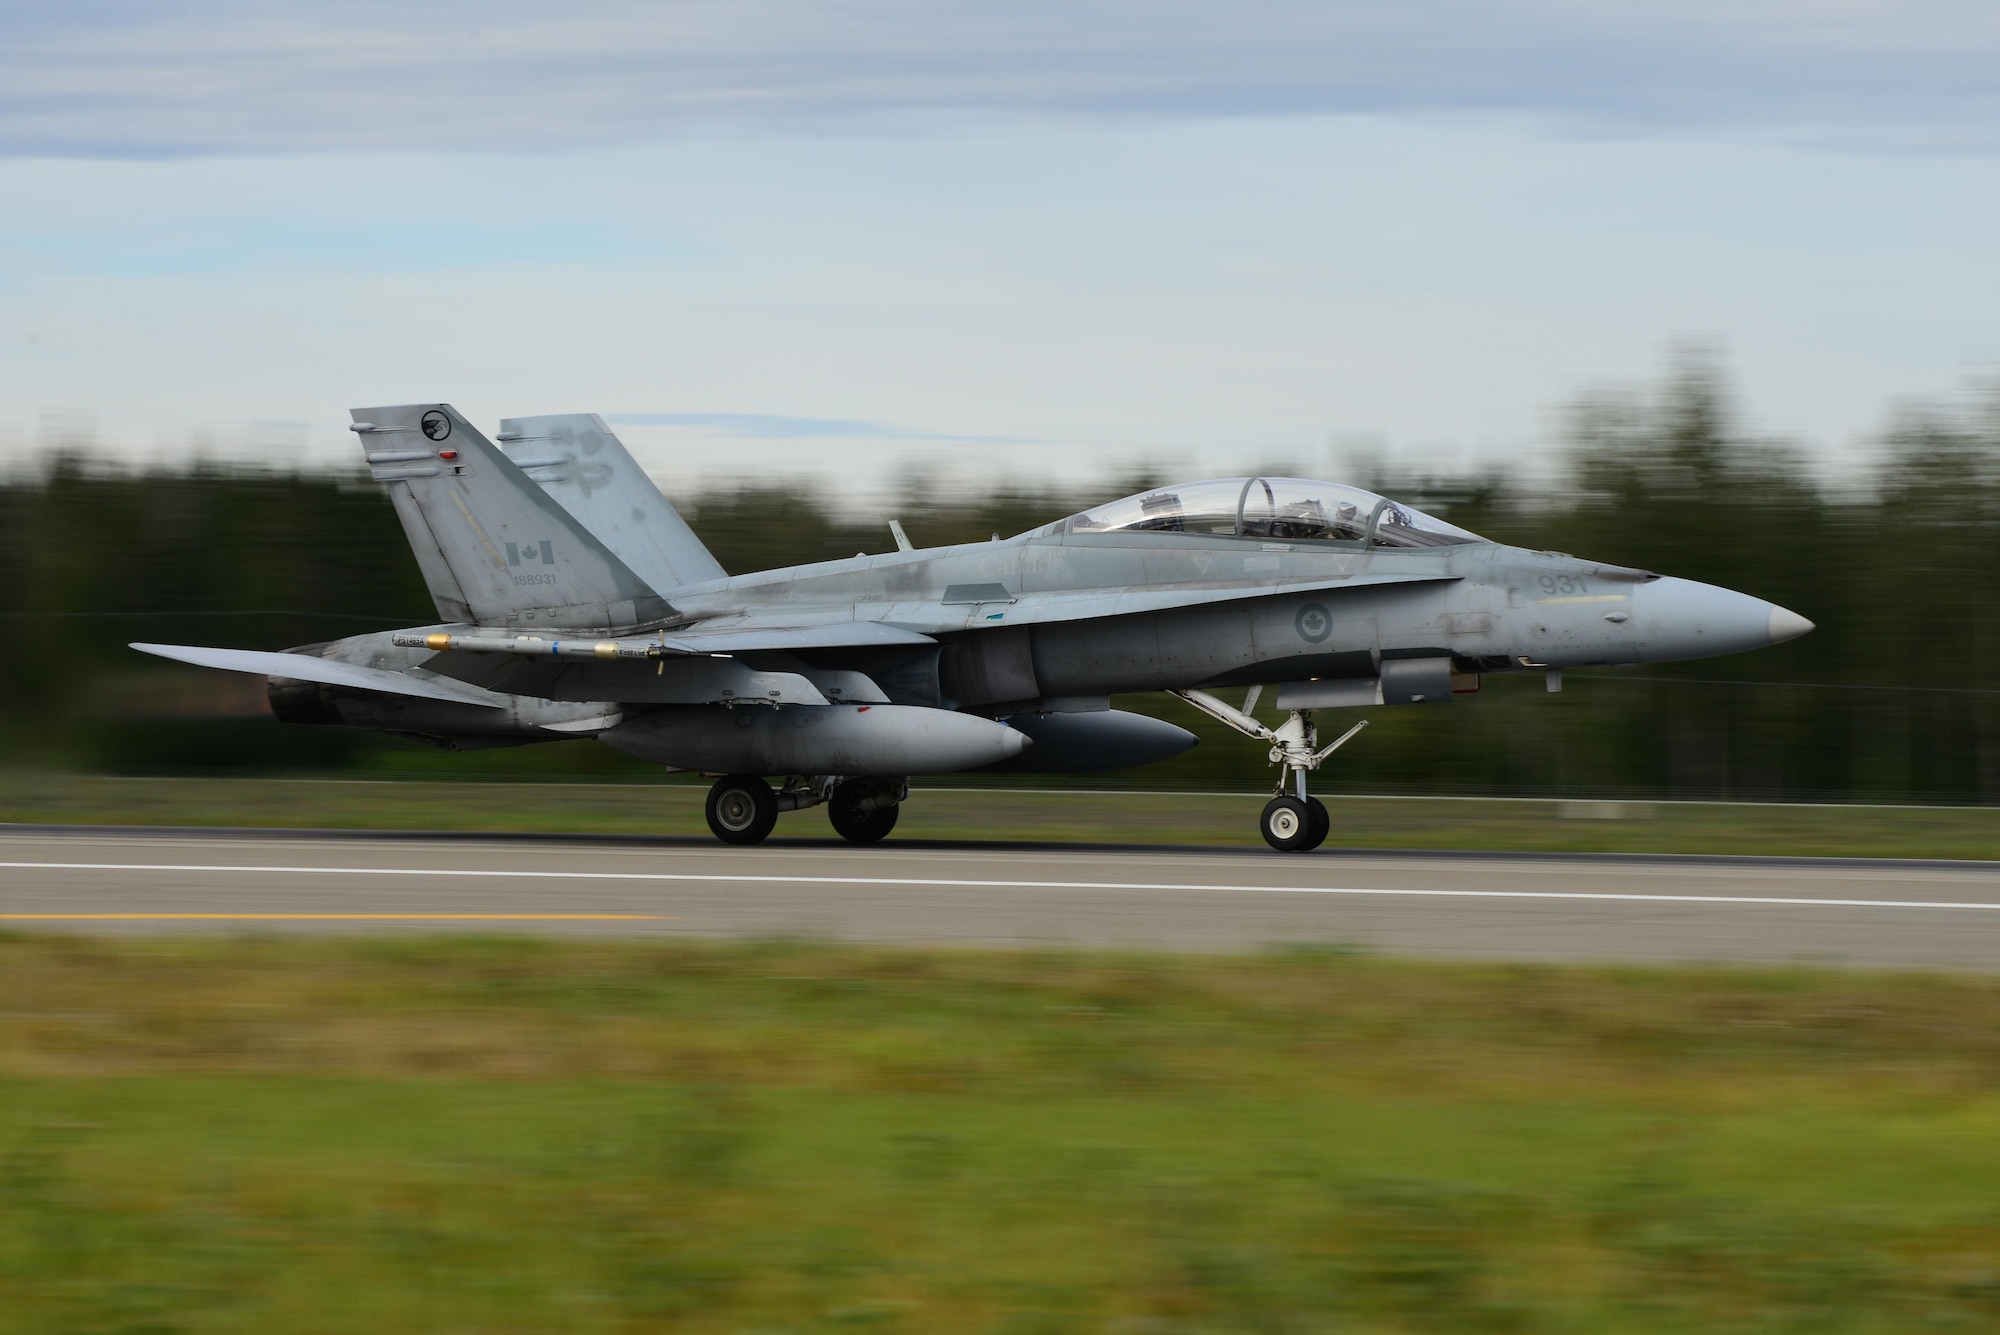 A Royal Canadian Air Force CF-18 Hornet aircraft assigned to the 409th Tactical Fighter Squadron, Canadian Forces Base Cold Lake, Alberta, takes off from the Eielson Air Force Base, Alaska, runway Aug. 15, 2016, during RED FLAG-Alaska 16-3. The aircraft will participate in a morning sortie over the Joint Pacific Alaska Range Complex airspace, which spans more than 67,000 square miles and provides a realistic training environment that allows commanders to train for full spectrum engagements, ranging from individual skills to complex, large-scale engagements. (U.S. Air Force photo by Airman 1st Class Cassandra Whitman)